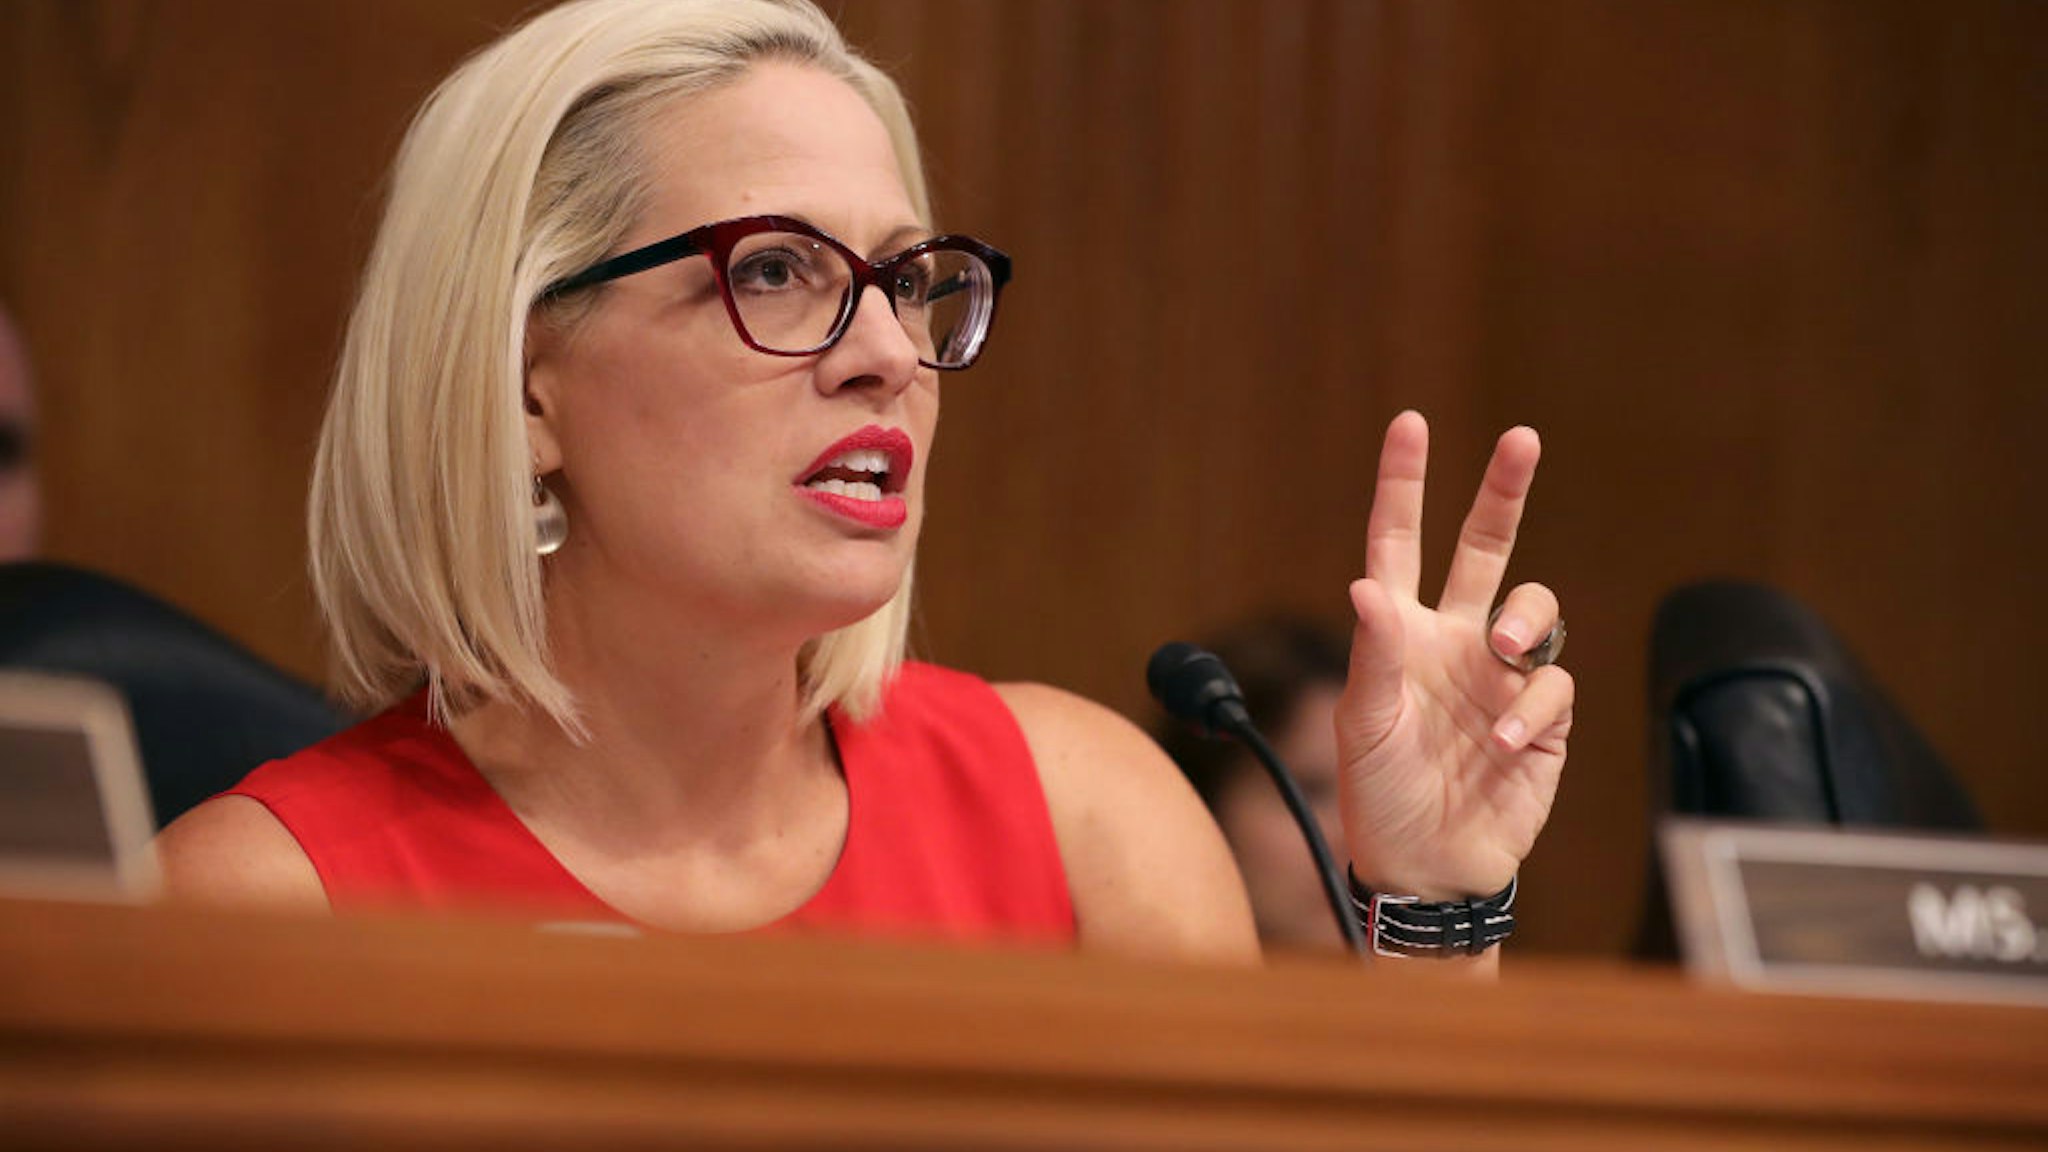 Arizona Sen. Kyrsten Sinema has changed her affiliation to independent, weakening the Democratic Party’s already tenuous hold on the upper chamber.